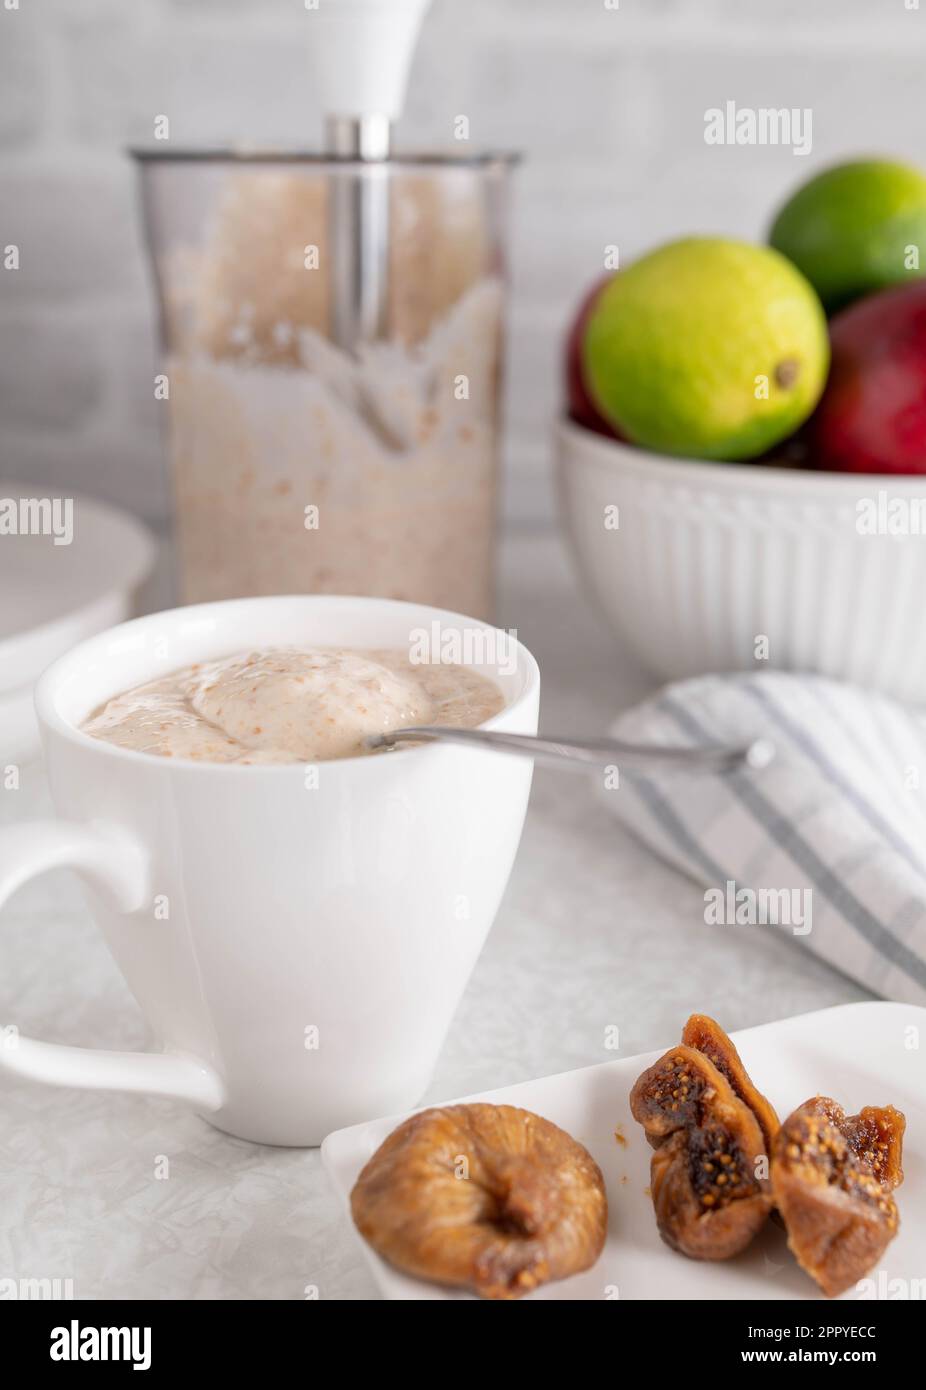 Yogurt with dried figs in a cup on kitchen counter Stock Photo